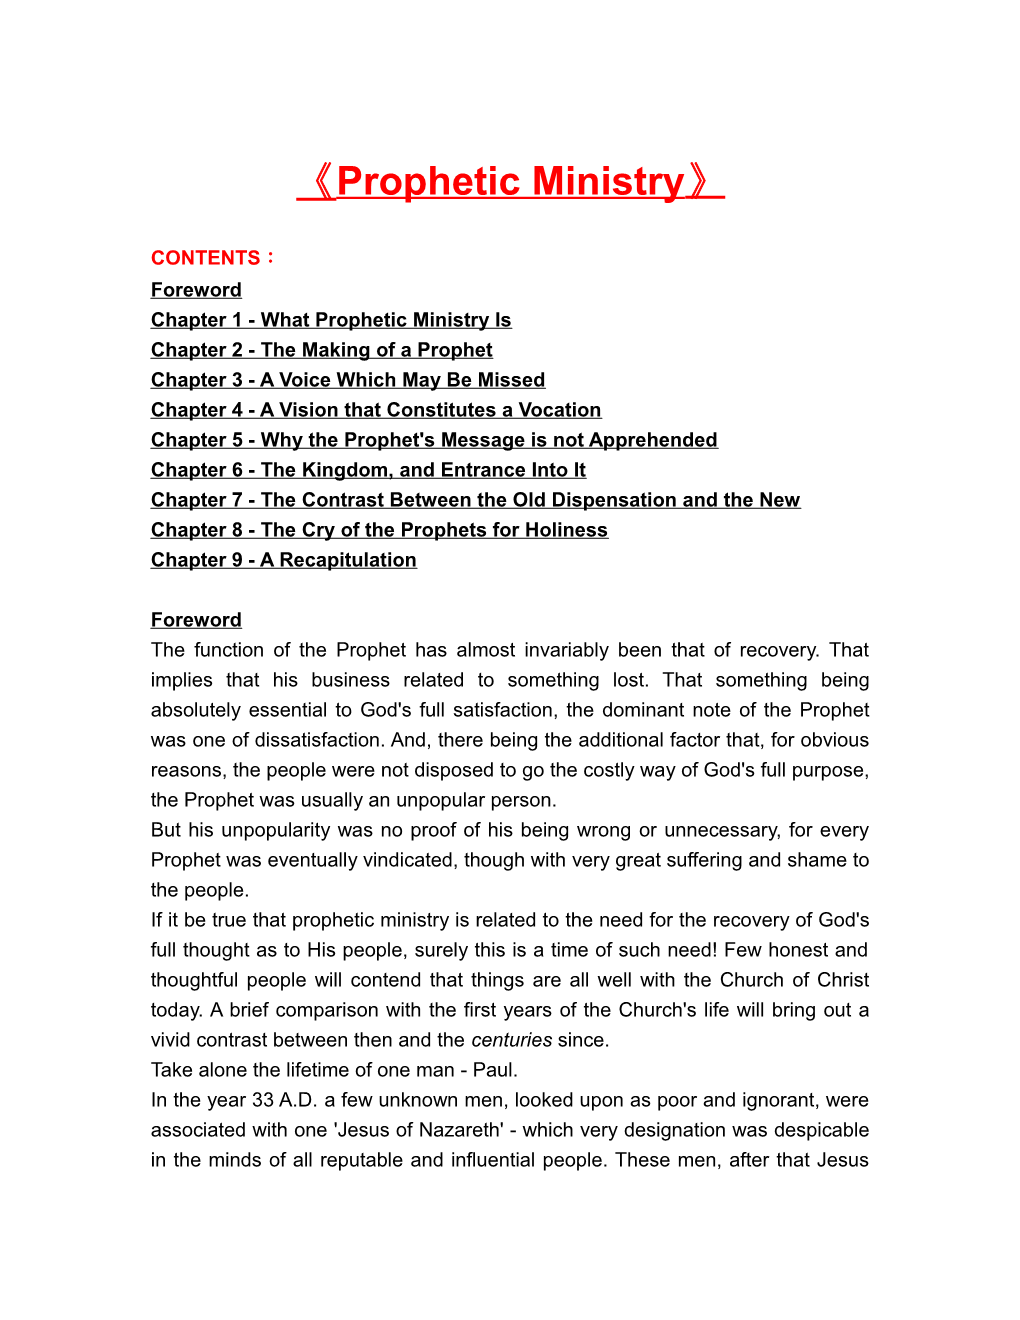 Chapter 1 - What Prophetic Ministry Is